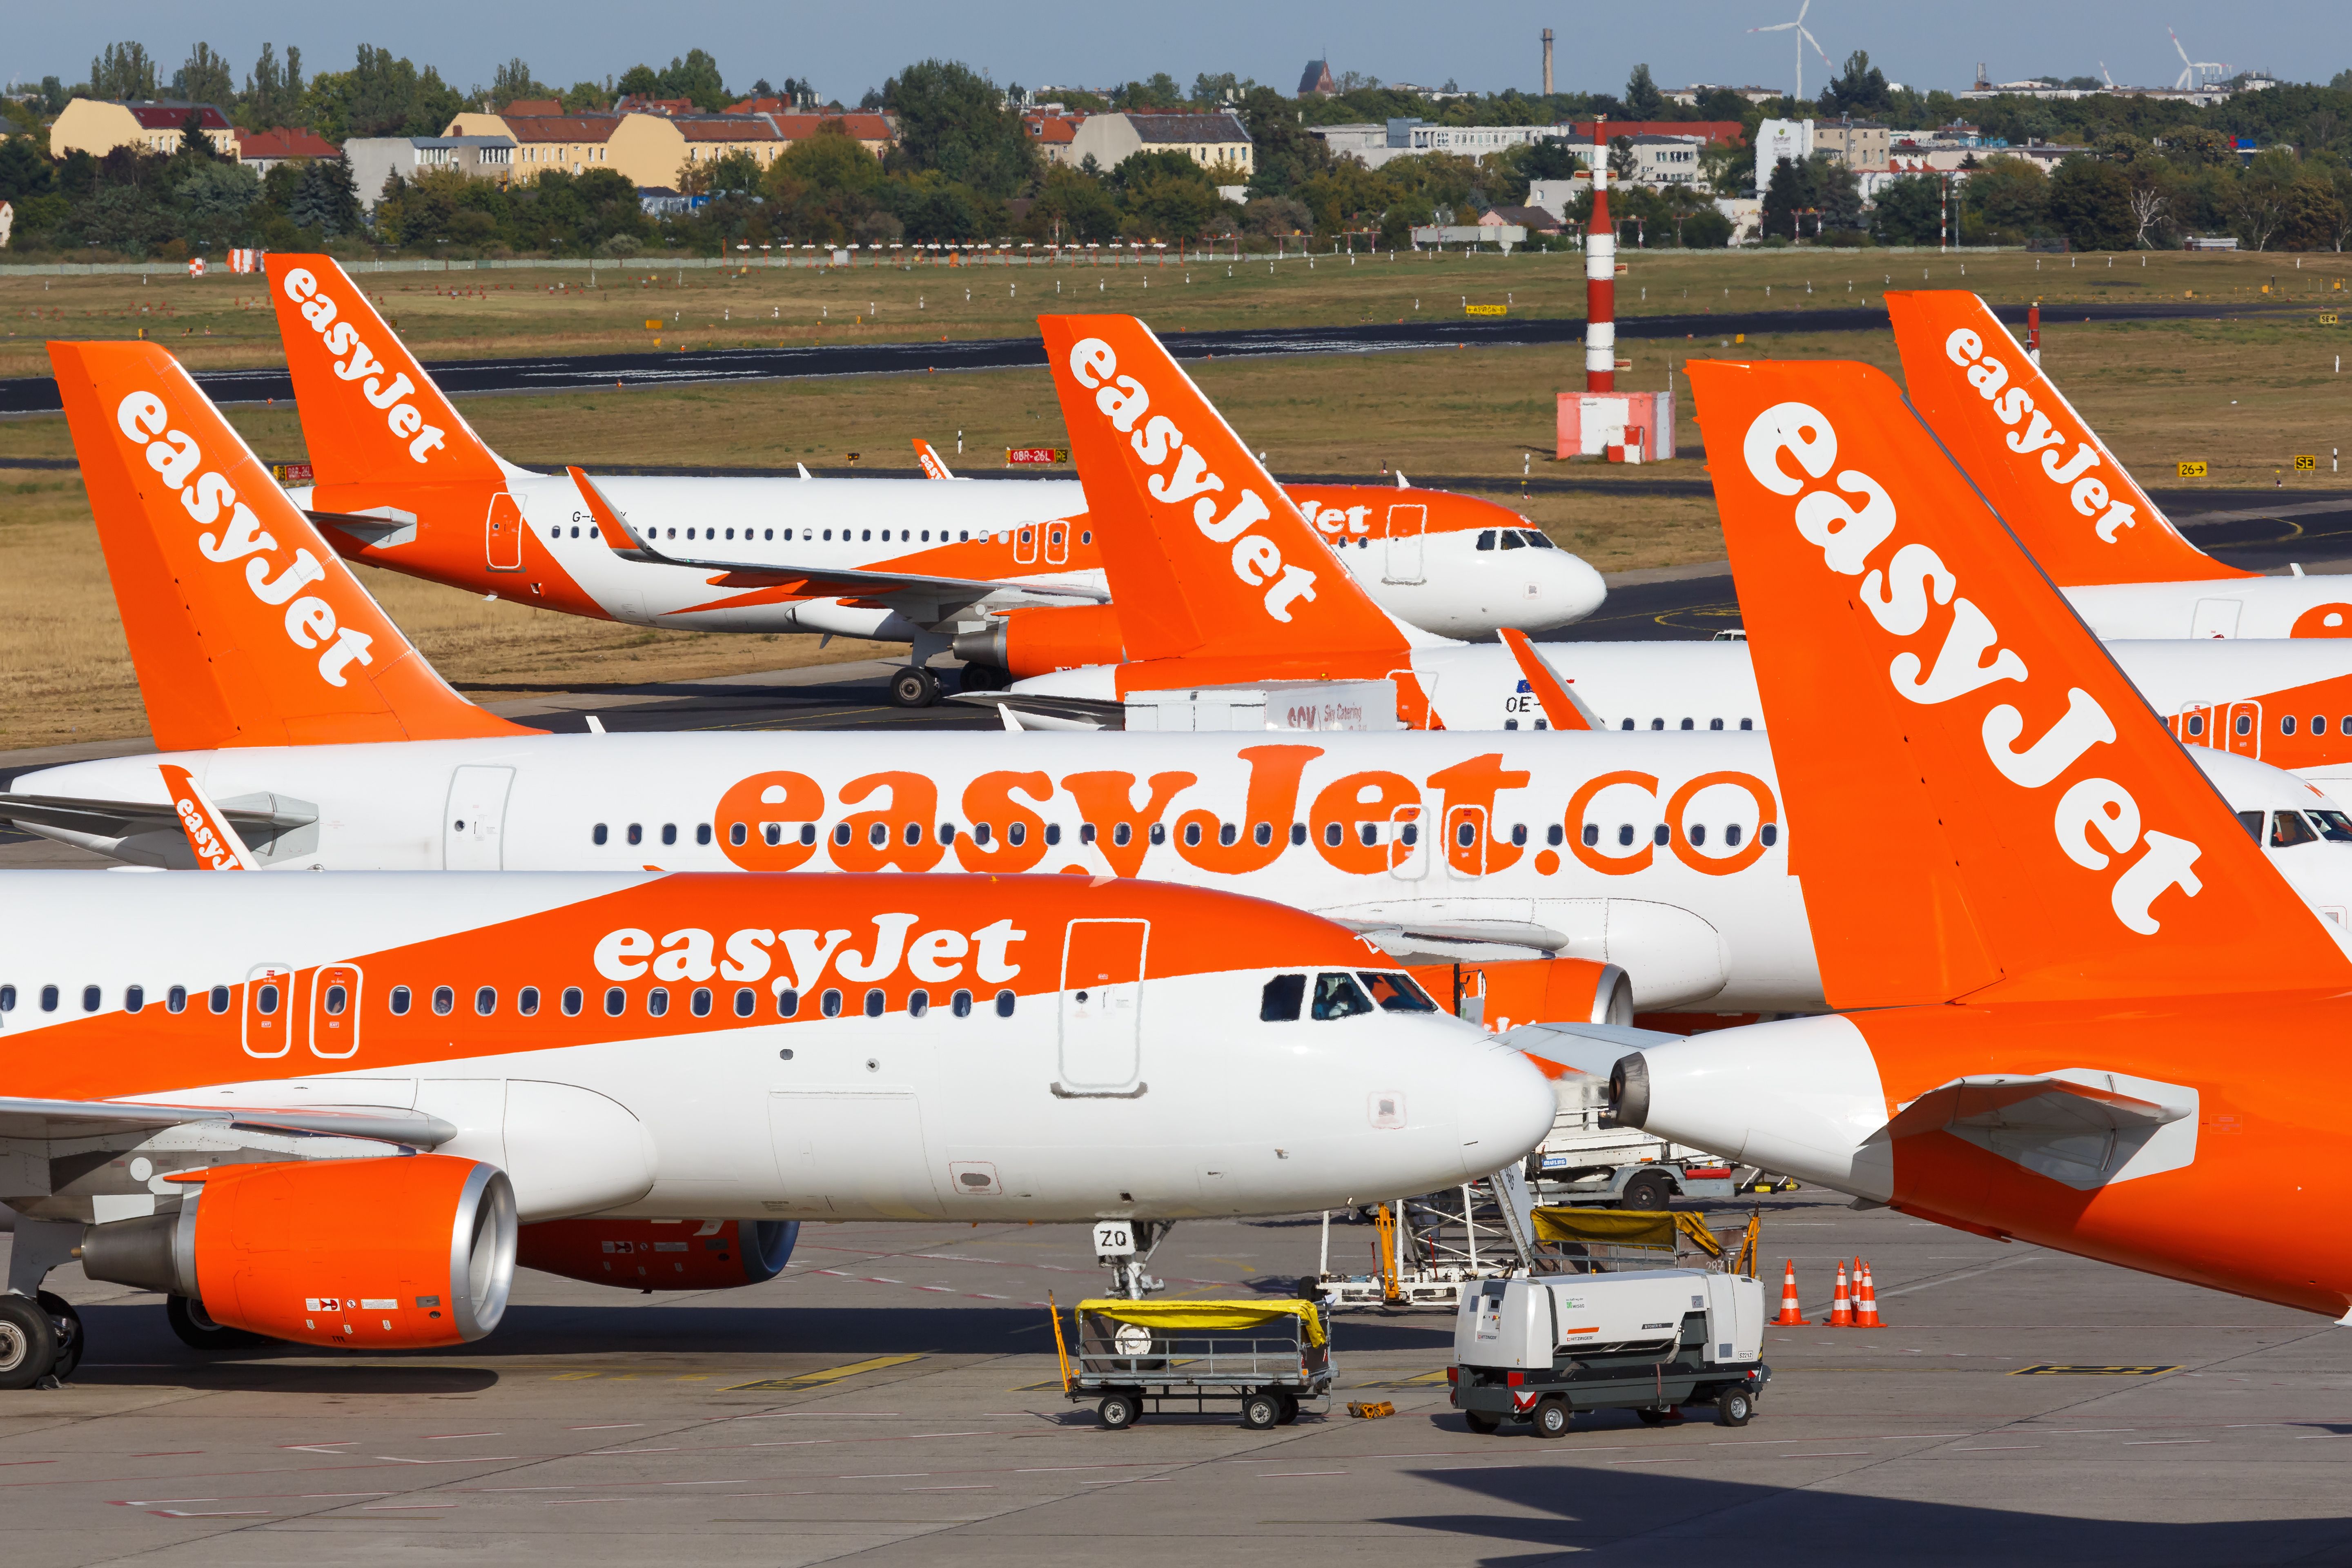 A large fleet of easyJet aircraft on the apron at Berlin Tegel Airport.